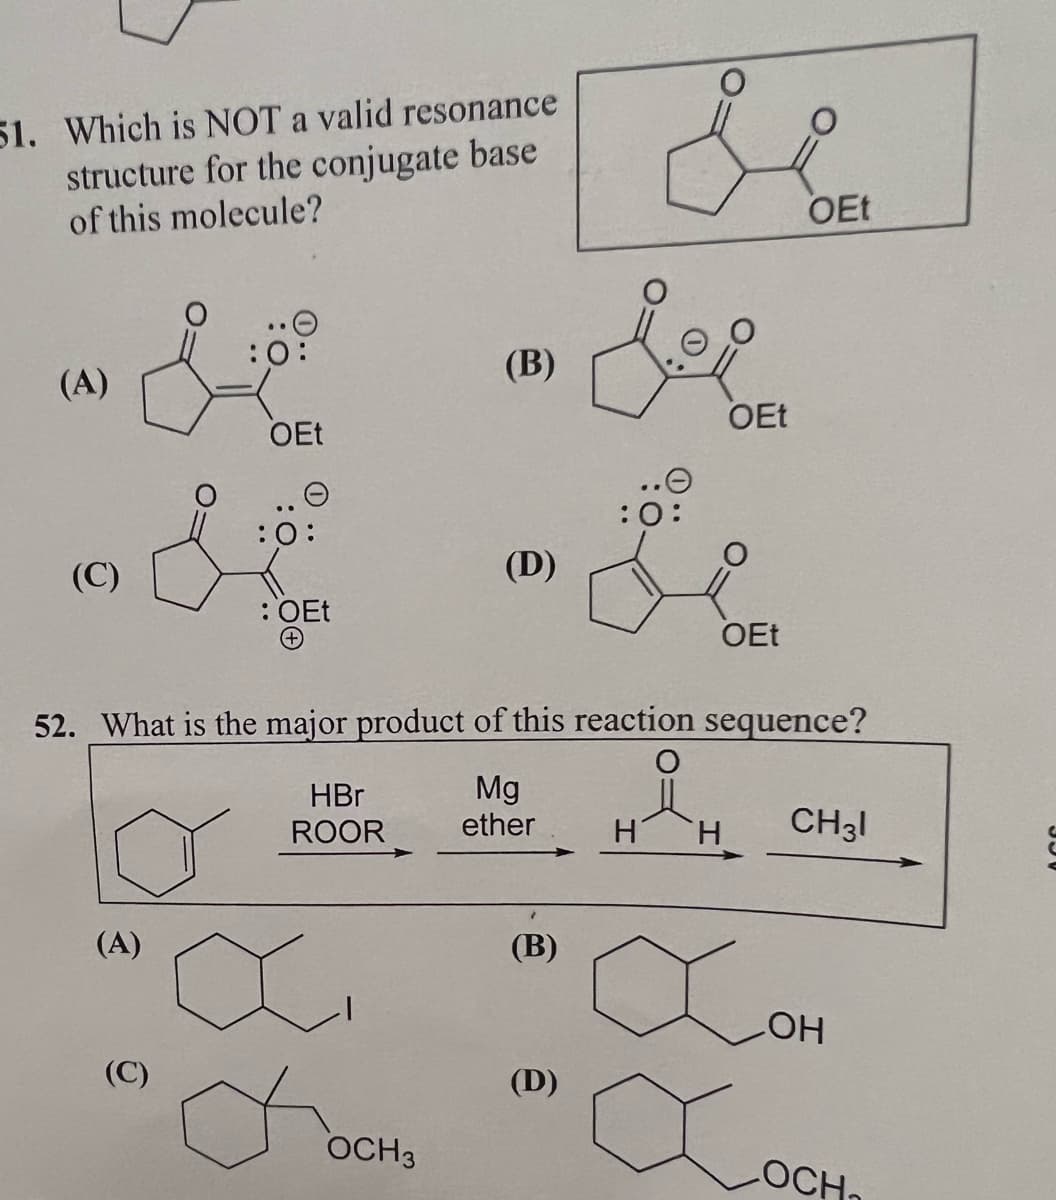 51. Which is NOT a valid resonance
structure for the conjugate base
of this molecule?
(A)
(C)
OEt
(C)
:0:
: OEt
(+)
HBr
ROOR
ü
(B)
OCH 3
(D)
52. What is the major product of this reaction sequence?
o
Mg
ether
(A)
(B)
:0:
(D)
H
OEt
OEt
H
OEt
X
CH31
LOH
LOCH₁